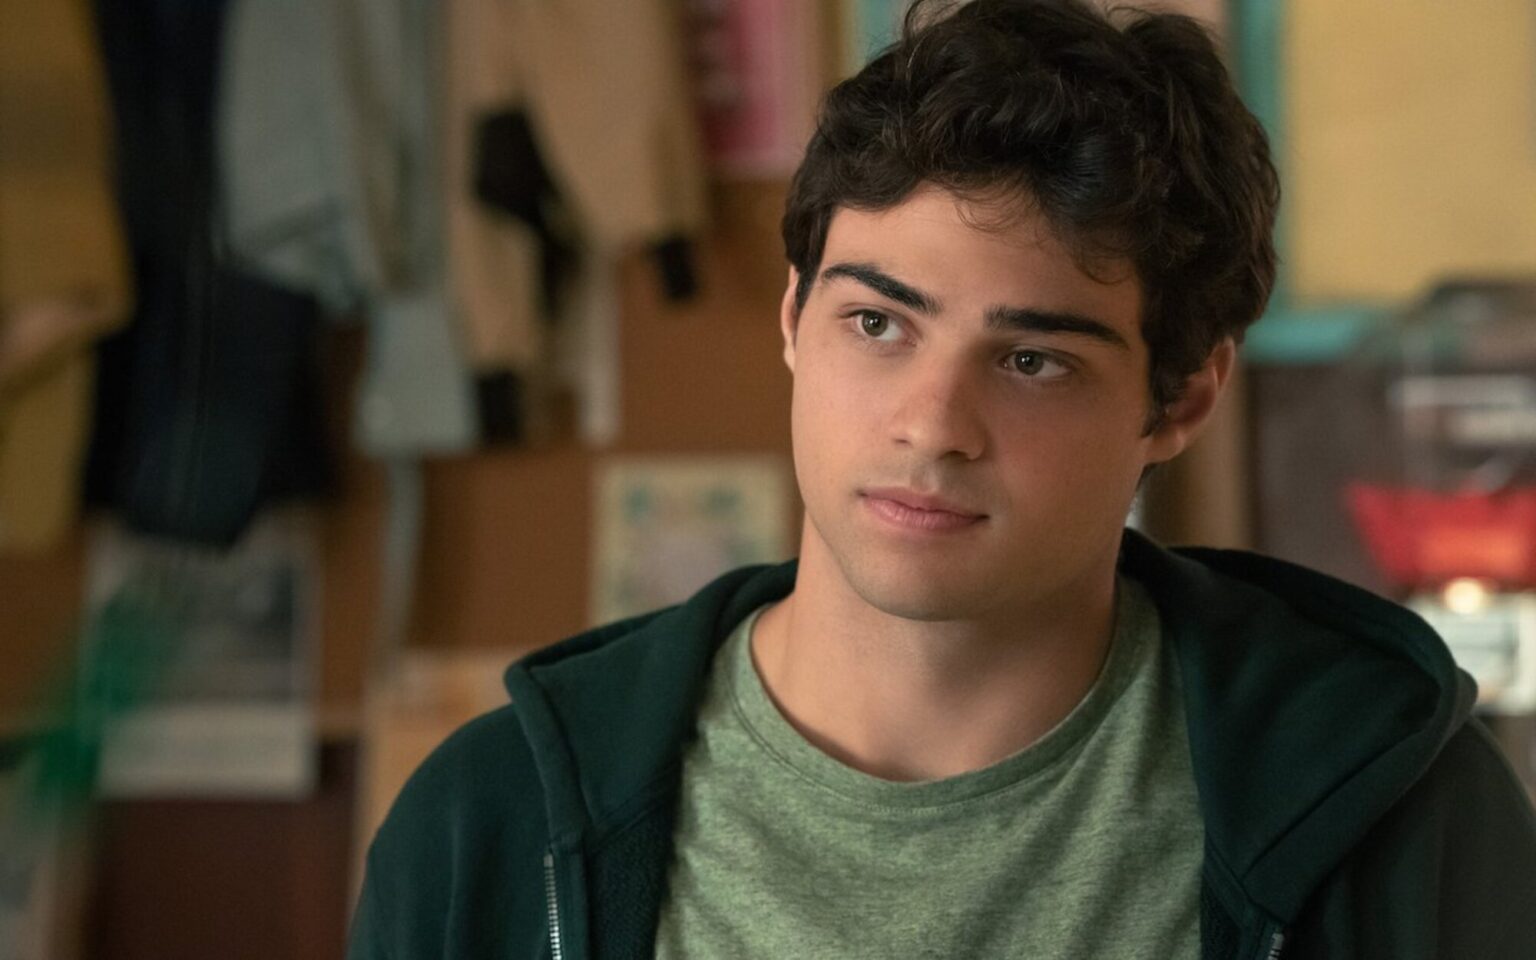 Does Netflix producers have Noah Centineo locked up in their headquarters? Check out all the details about the actor's new Netflix TV show here.